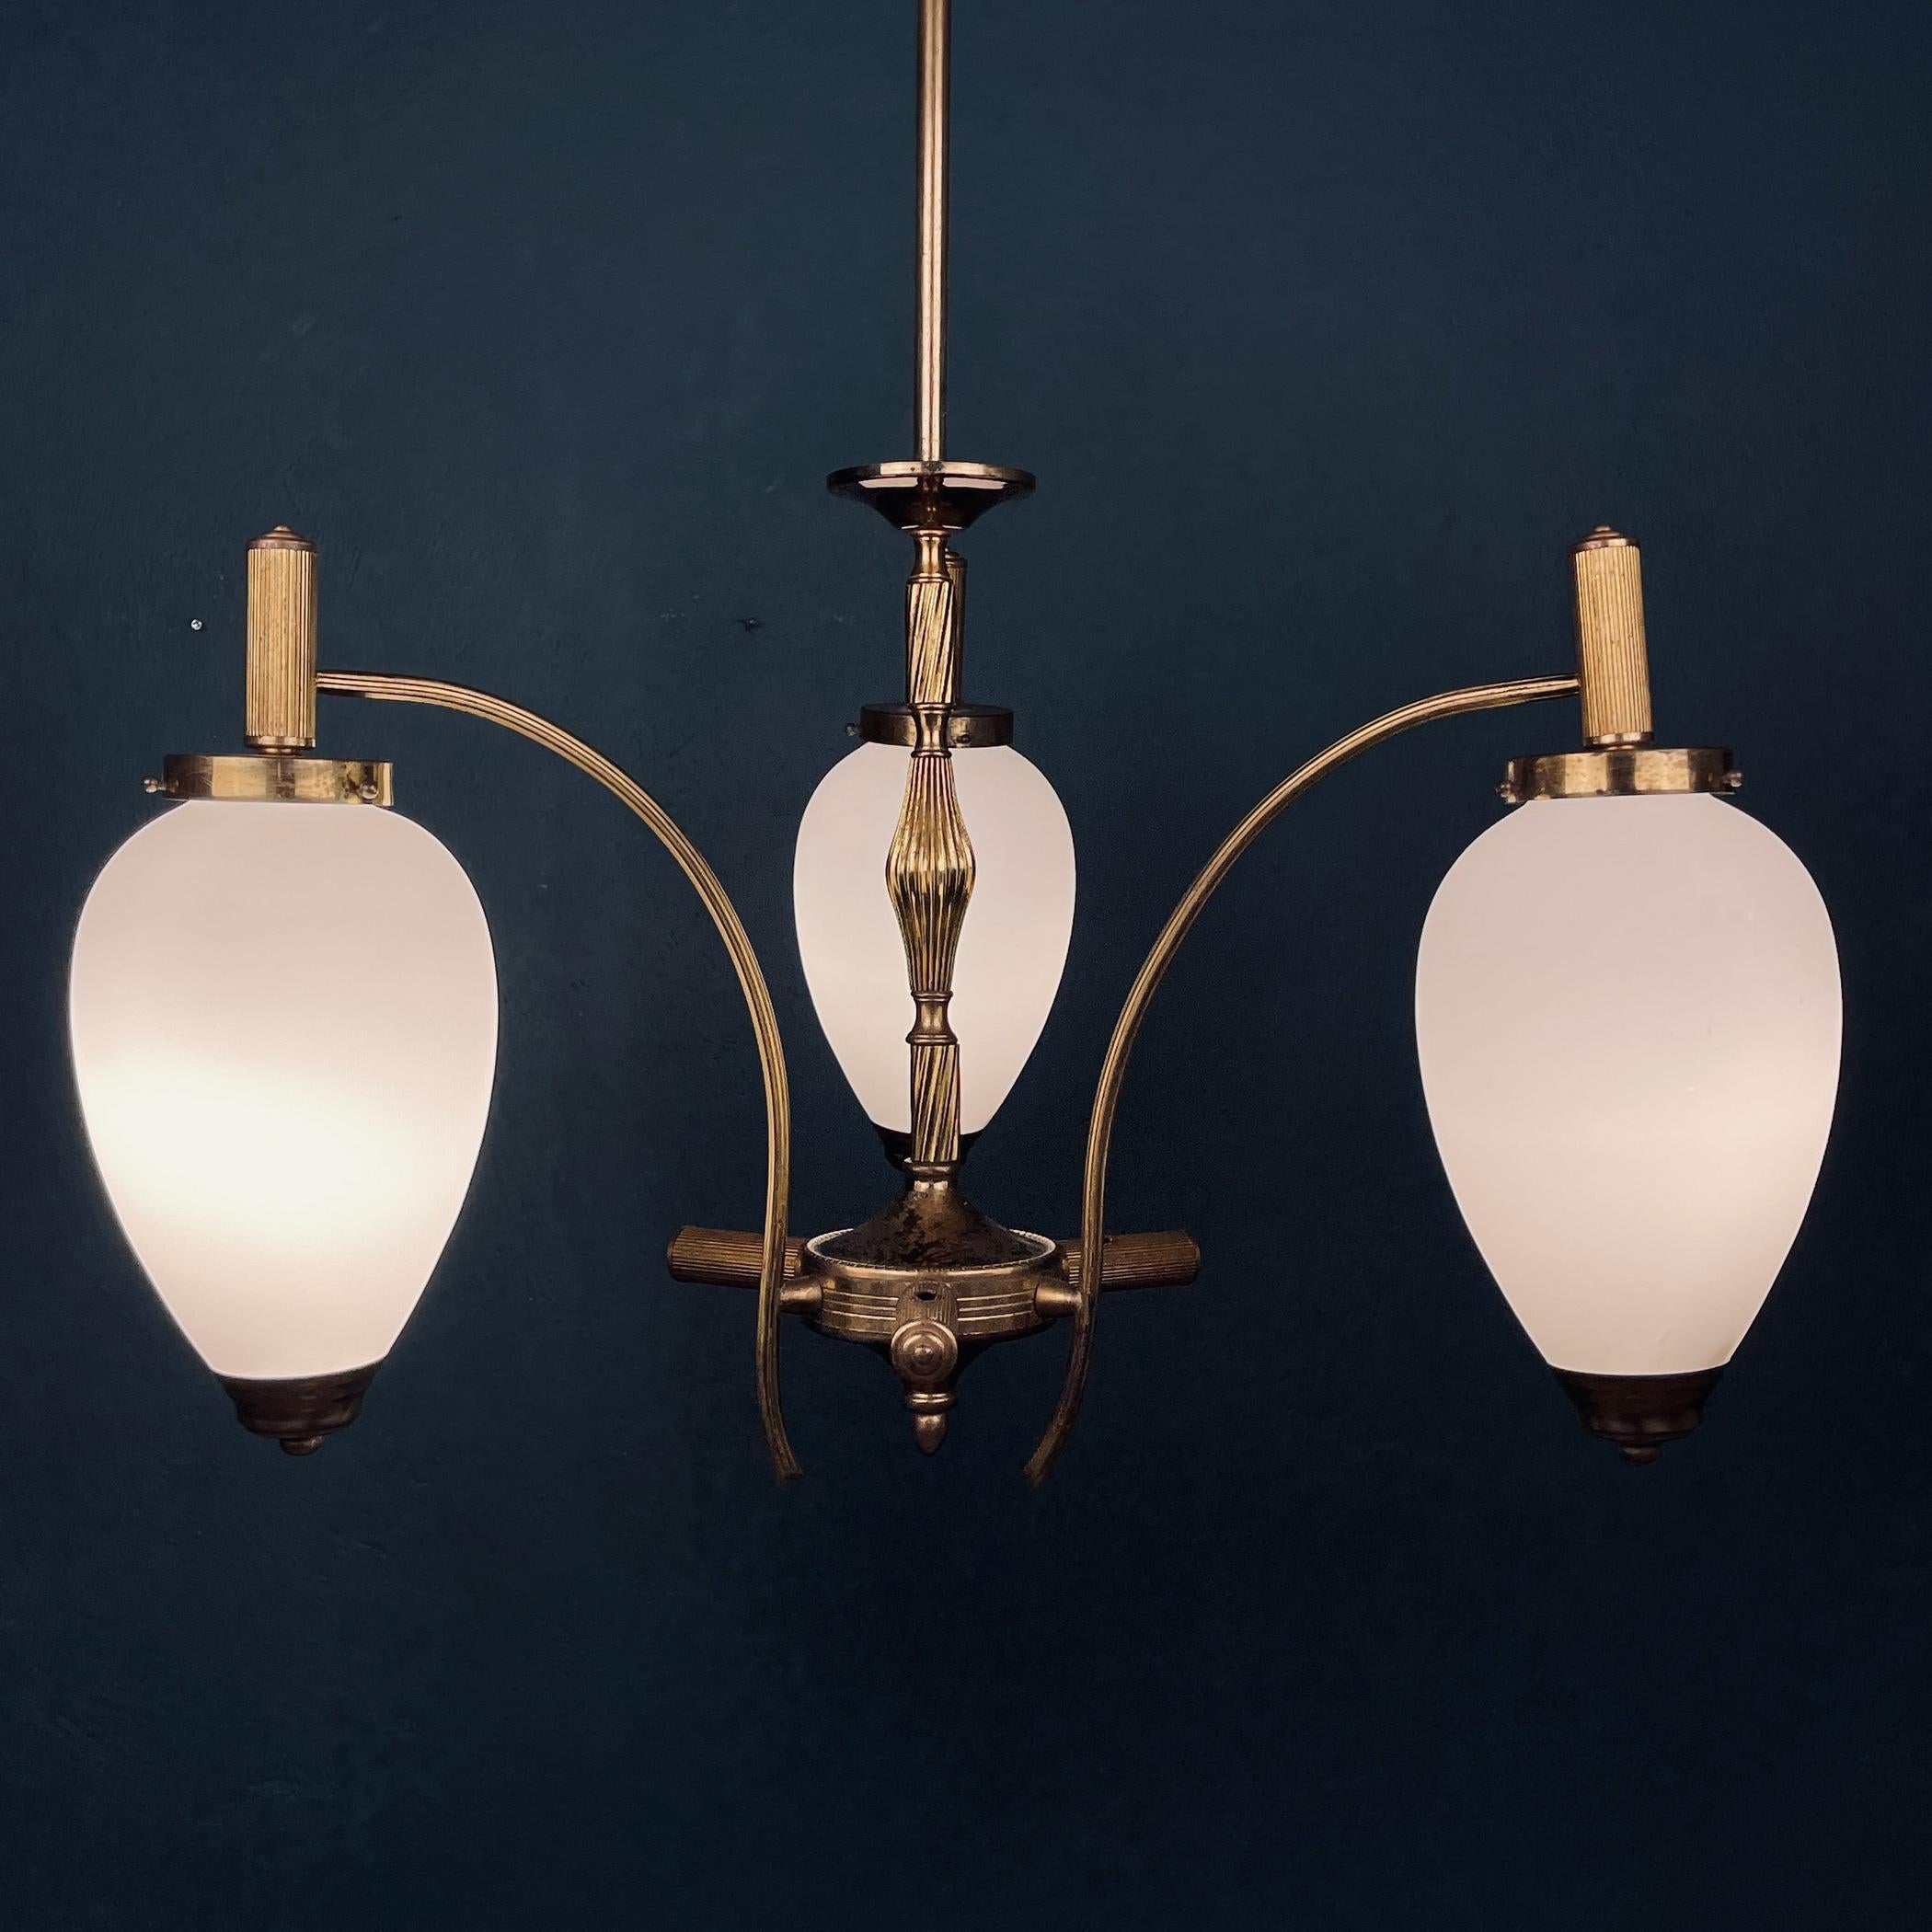 The very beautiful three arms pendant lamp of classic Italian design from the middle of the last century. Made in Italy in the 1950s. Very good vintage condition. The patina on brass. Frosted opaline glass without cracks or chips. This chandelier